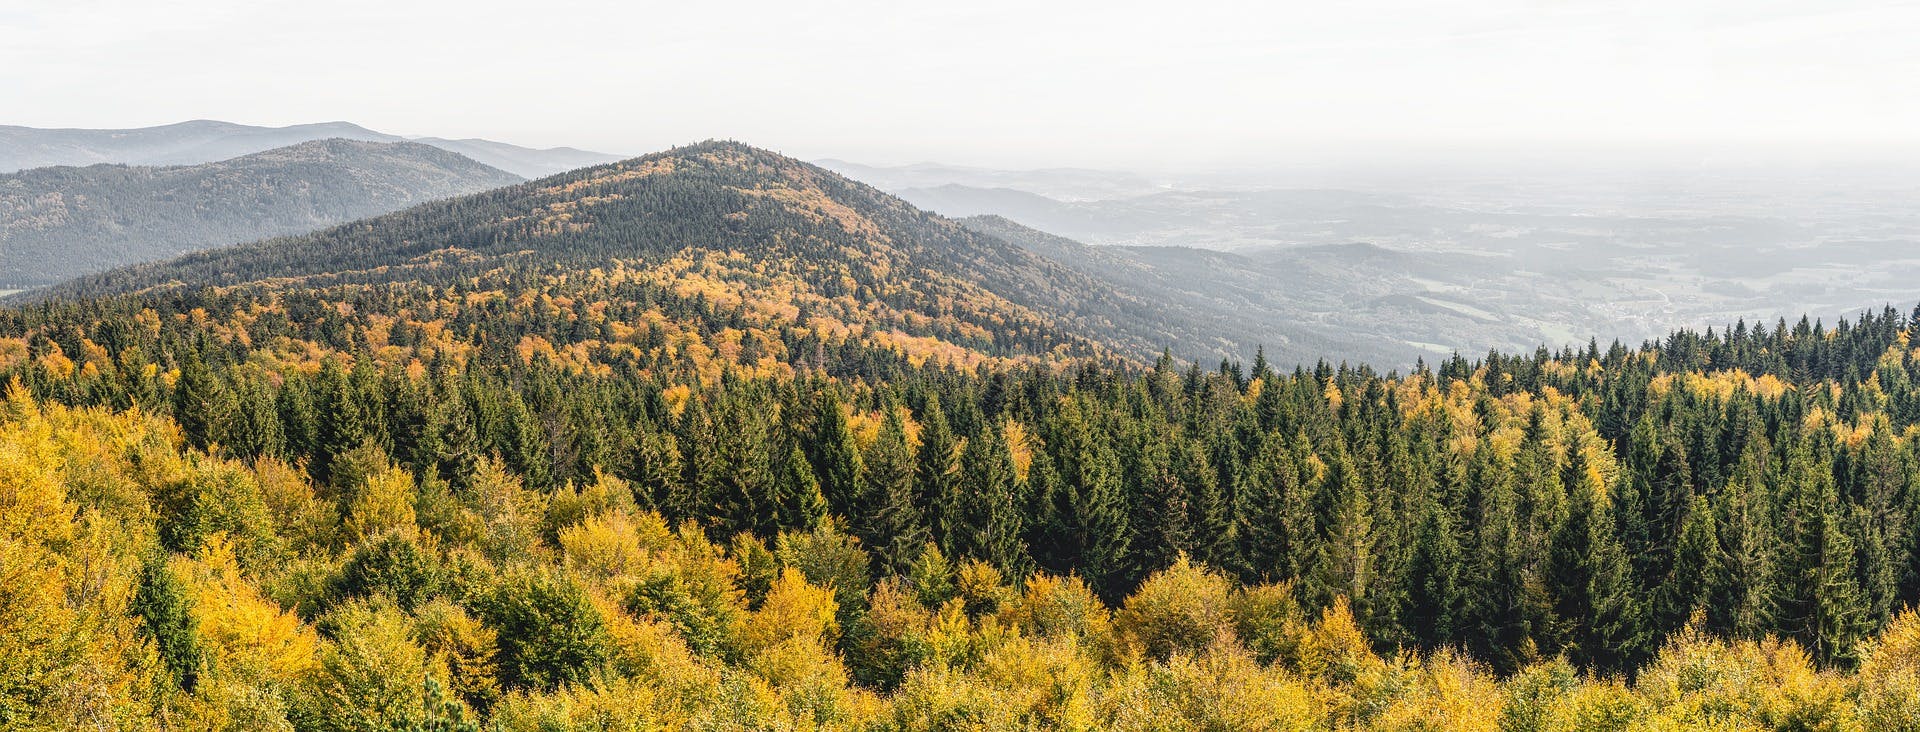 Image taken from the top of a mountain showing mixed forests and Bavarian mountain views.